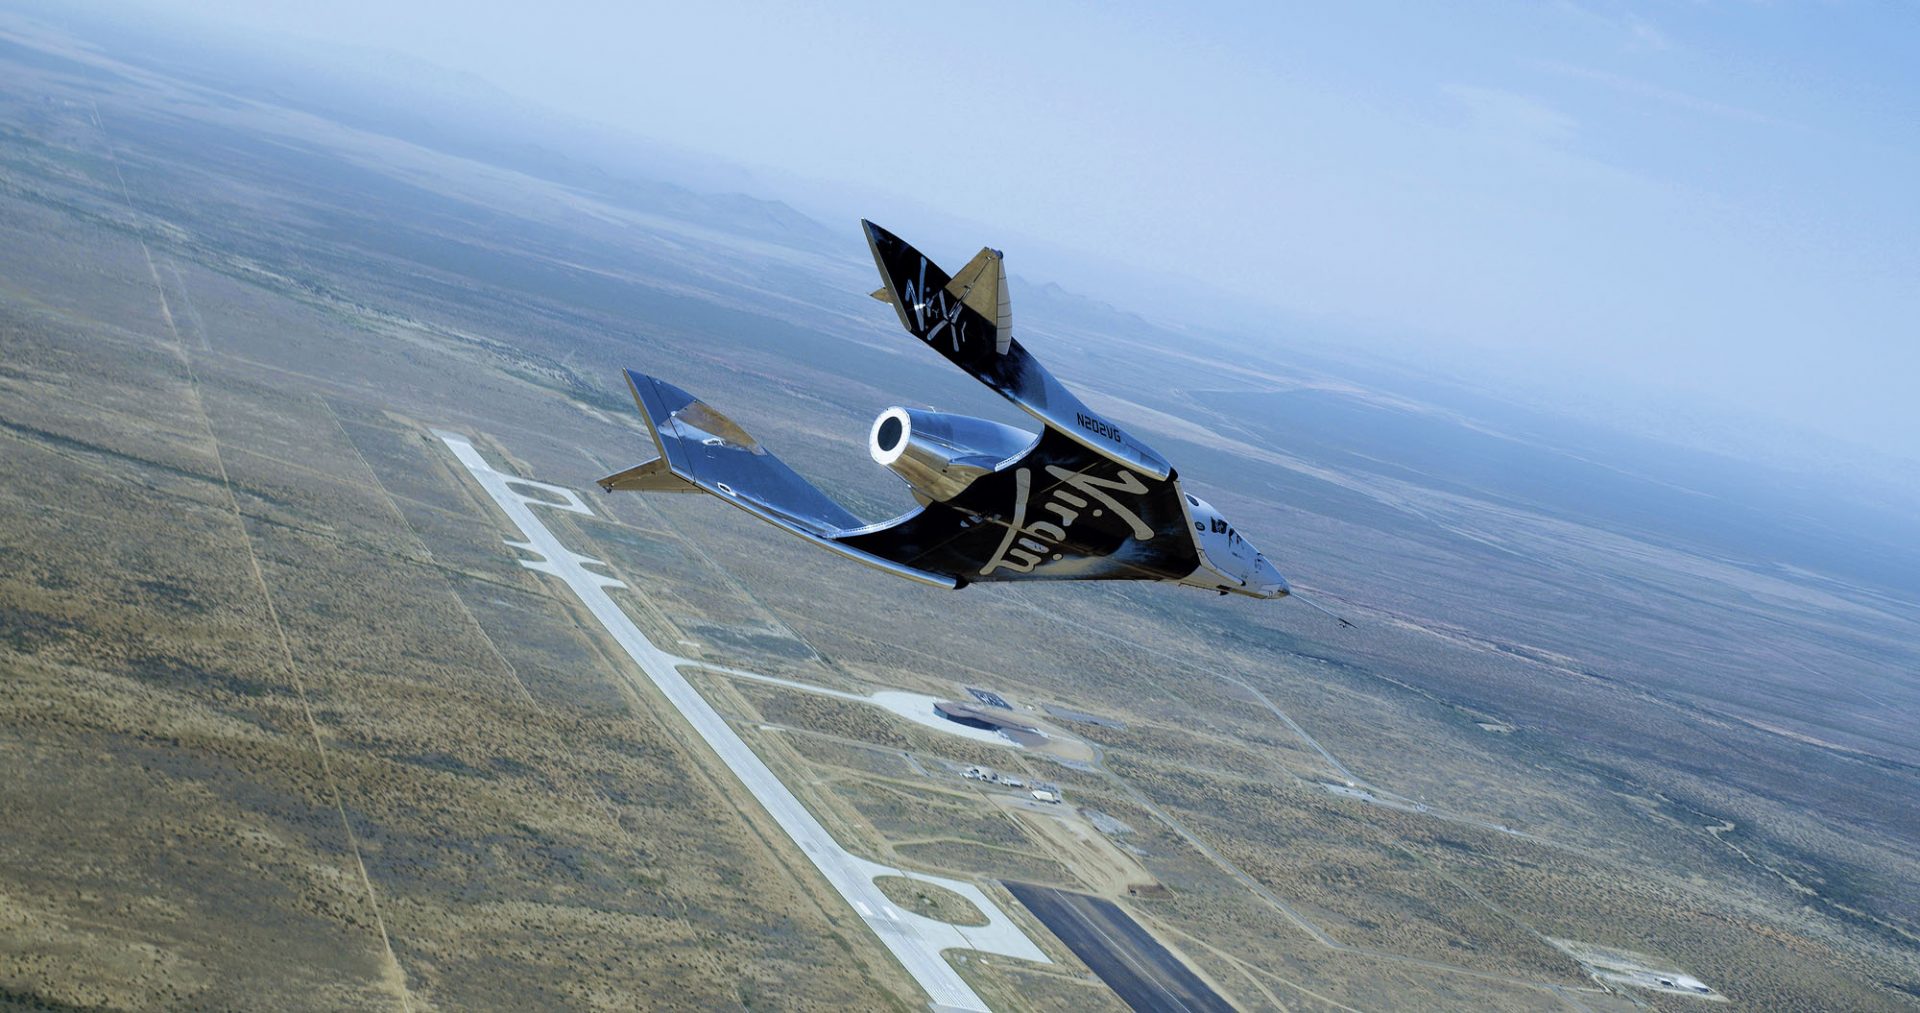 Virgin Galactic’s SpaceShipTwo aces 2nd fly flight over Spaceport The United States